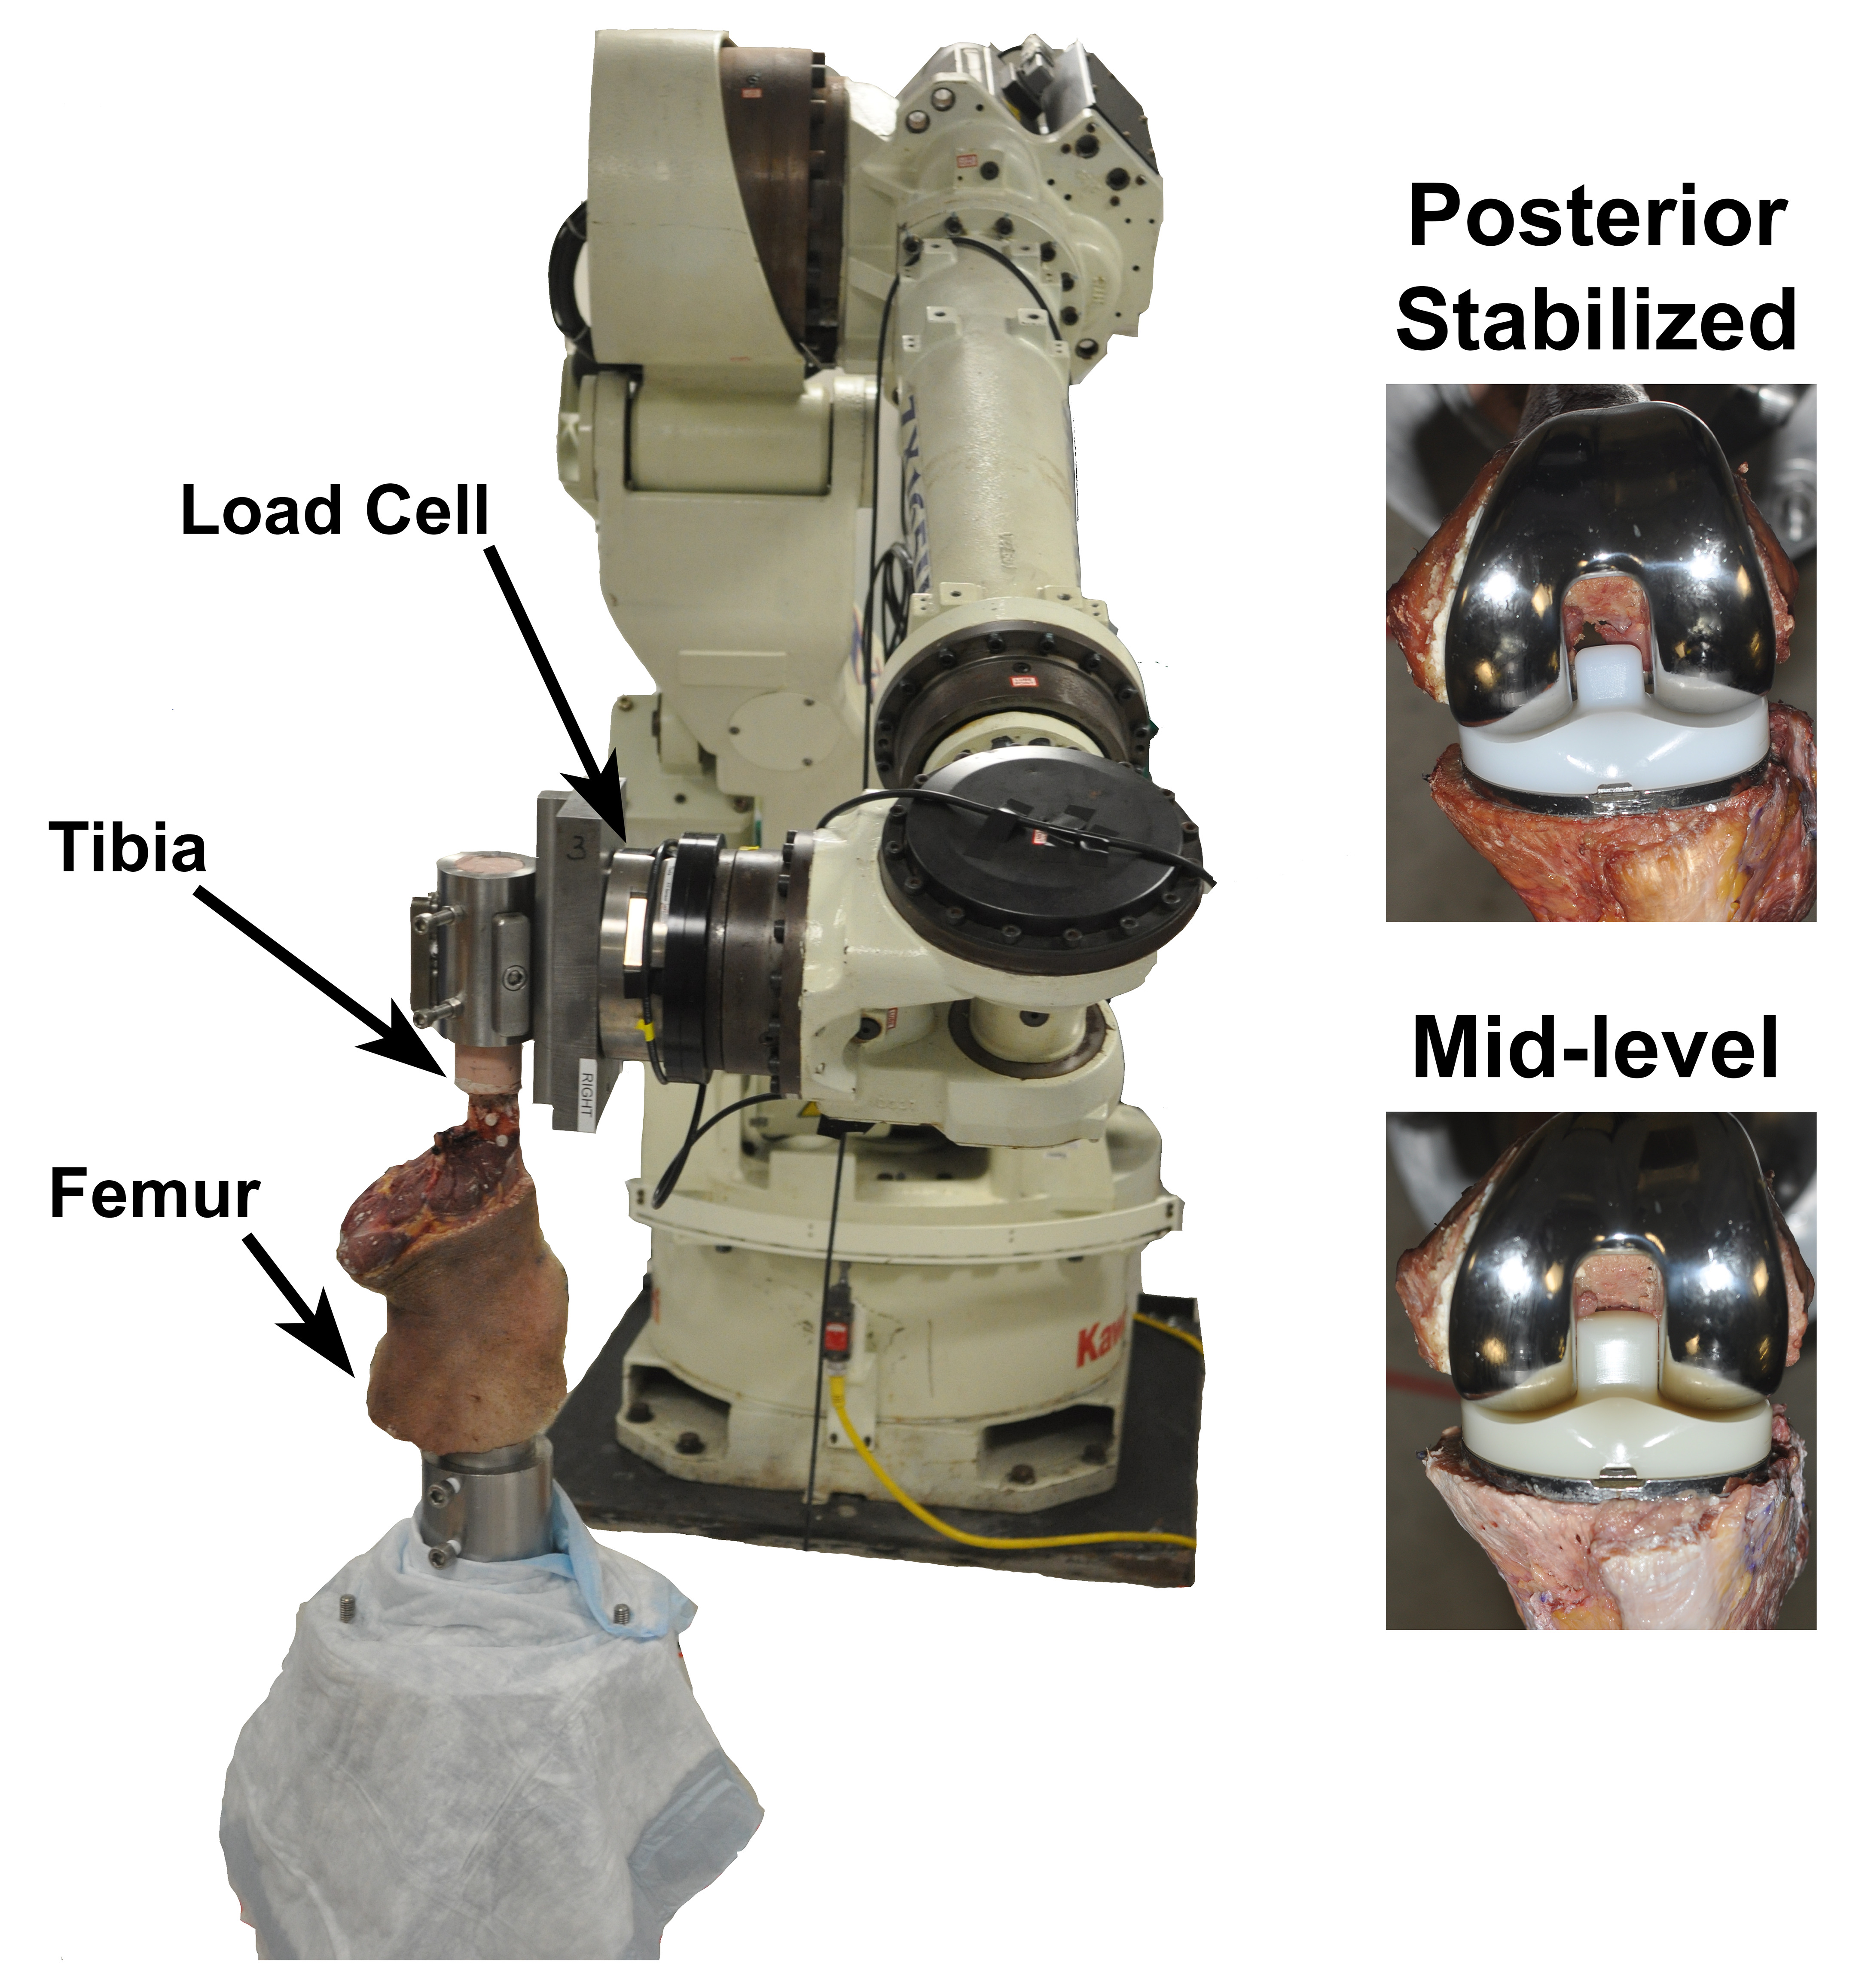 Fig. 2 
            Robotic manipulator with six-axis force/torque sensor (load cell) with cadaveric knee specimen mounted in place. Each specimen was tested with the posterior-stabilized and mid-level tibial inserts (Persona; Zimmer Biomet, USA) shown to the right.
          